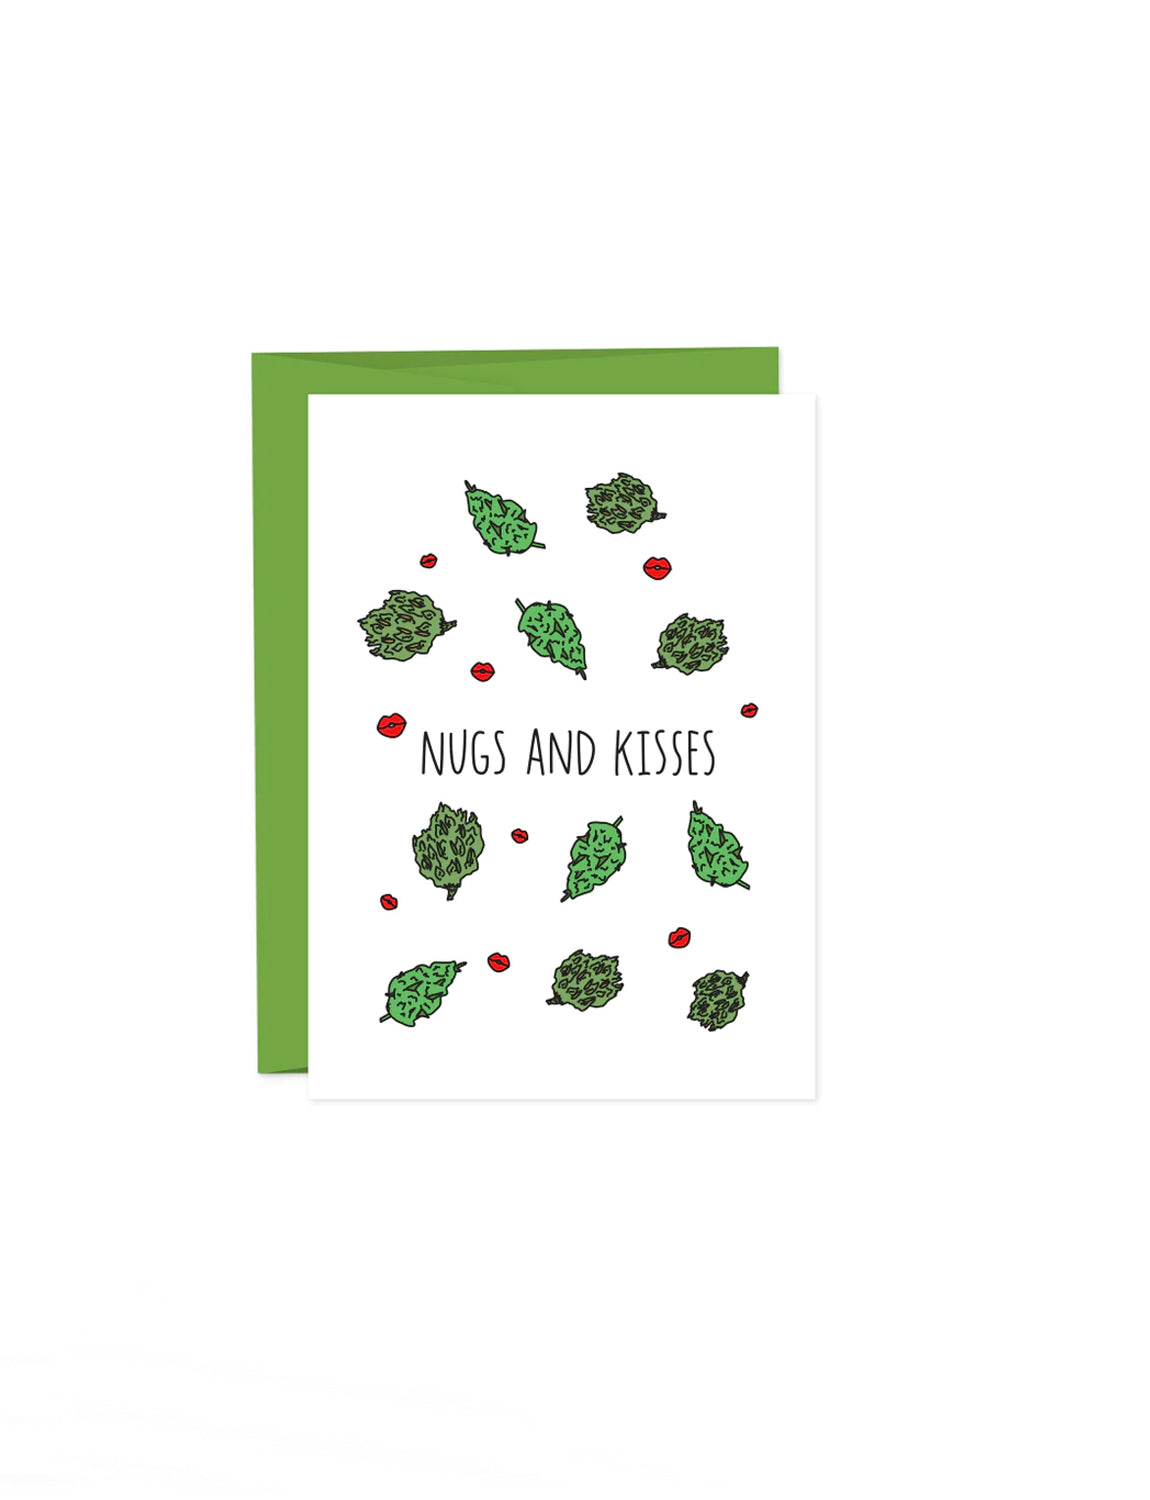 Weed Nugs and Kisses Card